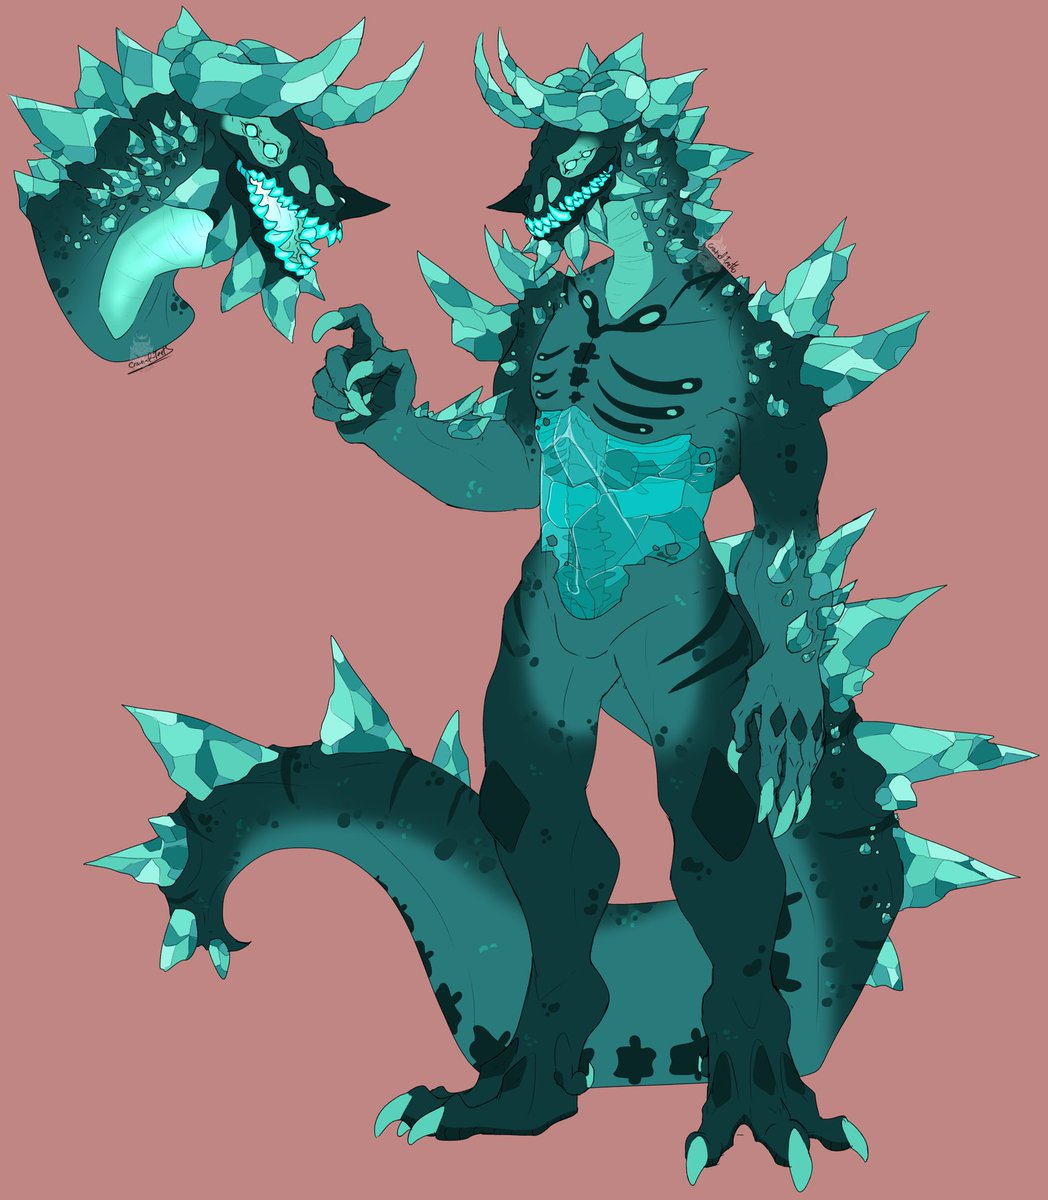 RT @Crown_of_Teeth: Finished design for the Frozen Teeth adopt! Purchased by @/Null_Cat_ ! https://t.co/i4gV358Mib